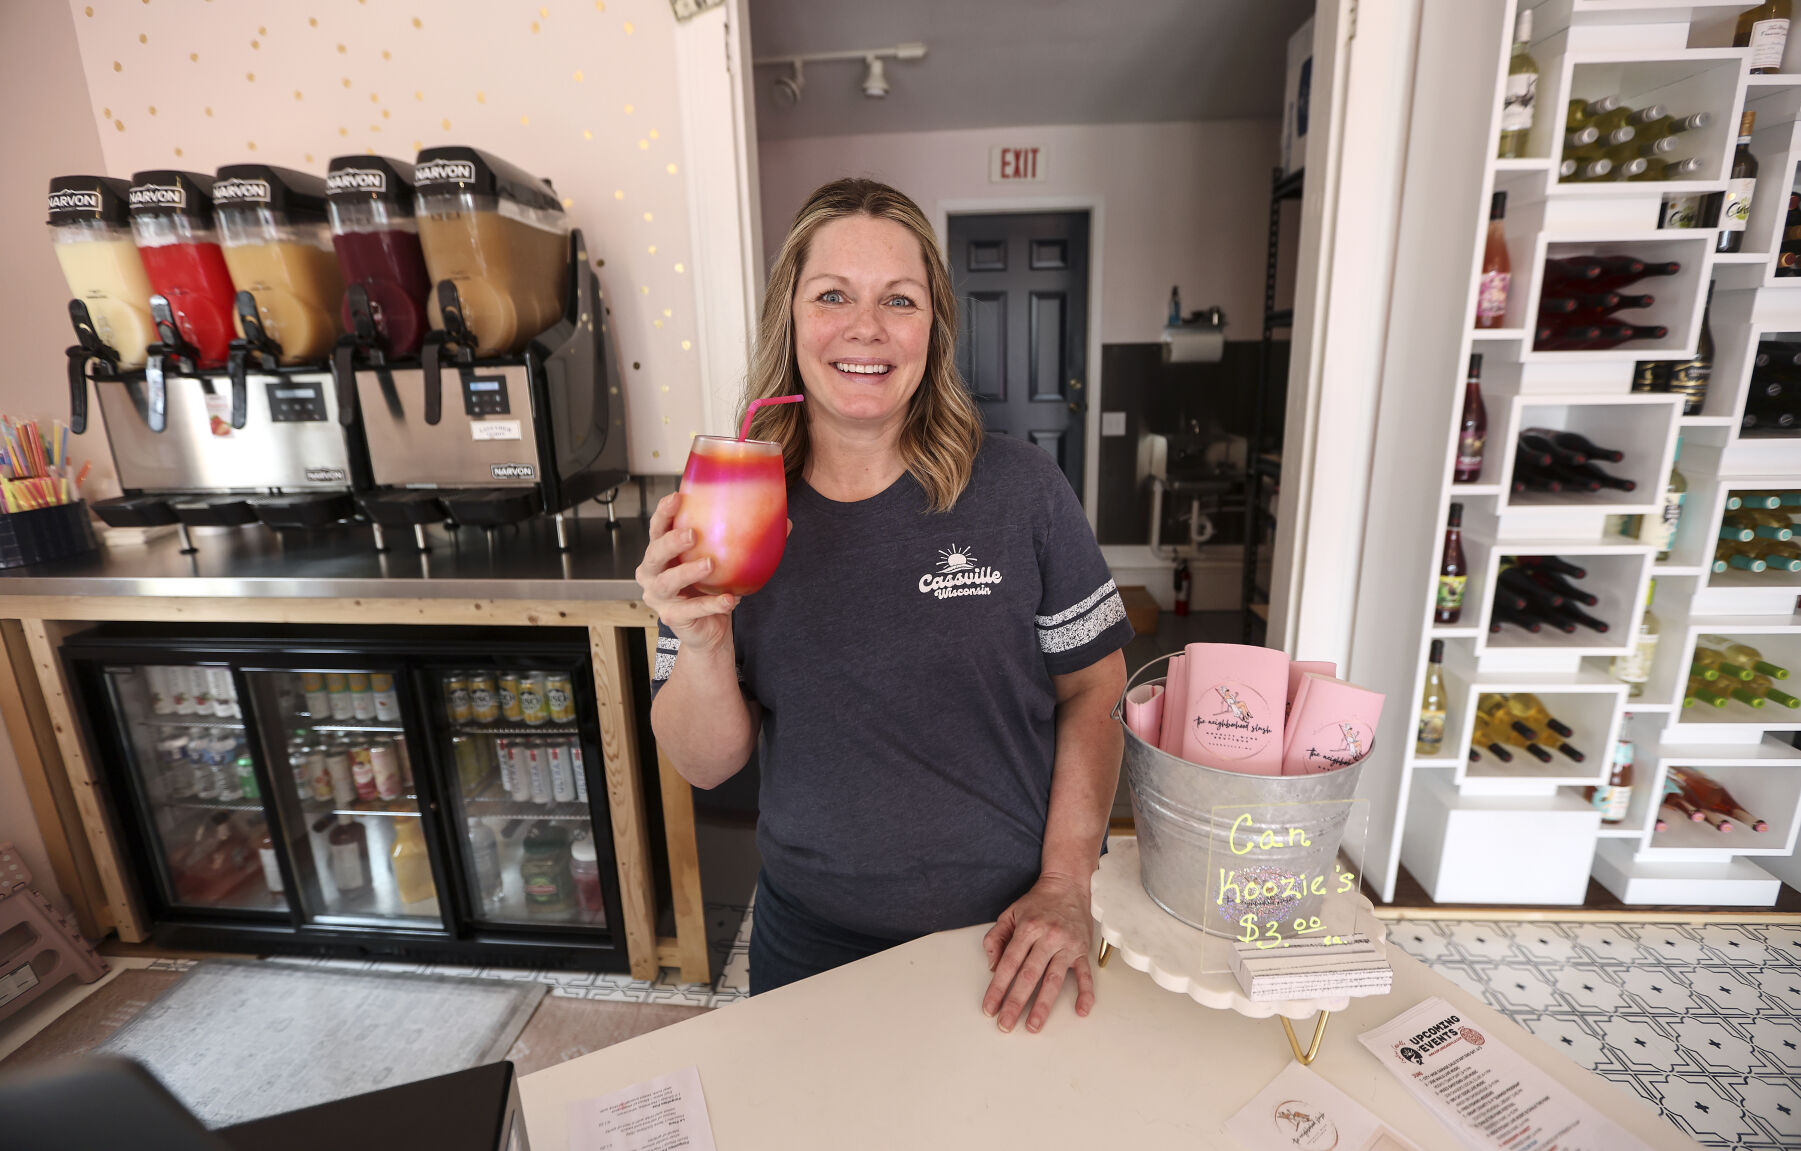 Owner of The Neighborhood Slush Carrie Wunderlin holds one of her wine slush drinks at her business located in Cassville, Wis., on Thursday, June 15, 2023.    PHOTO CREDIT: Dave Kettering